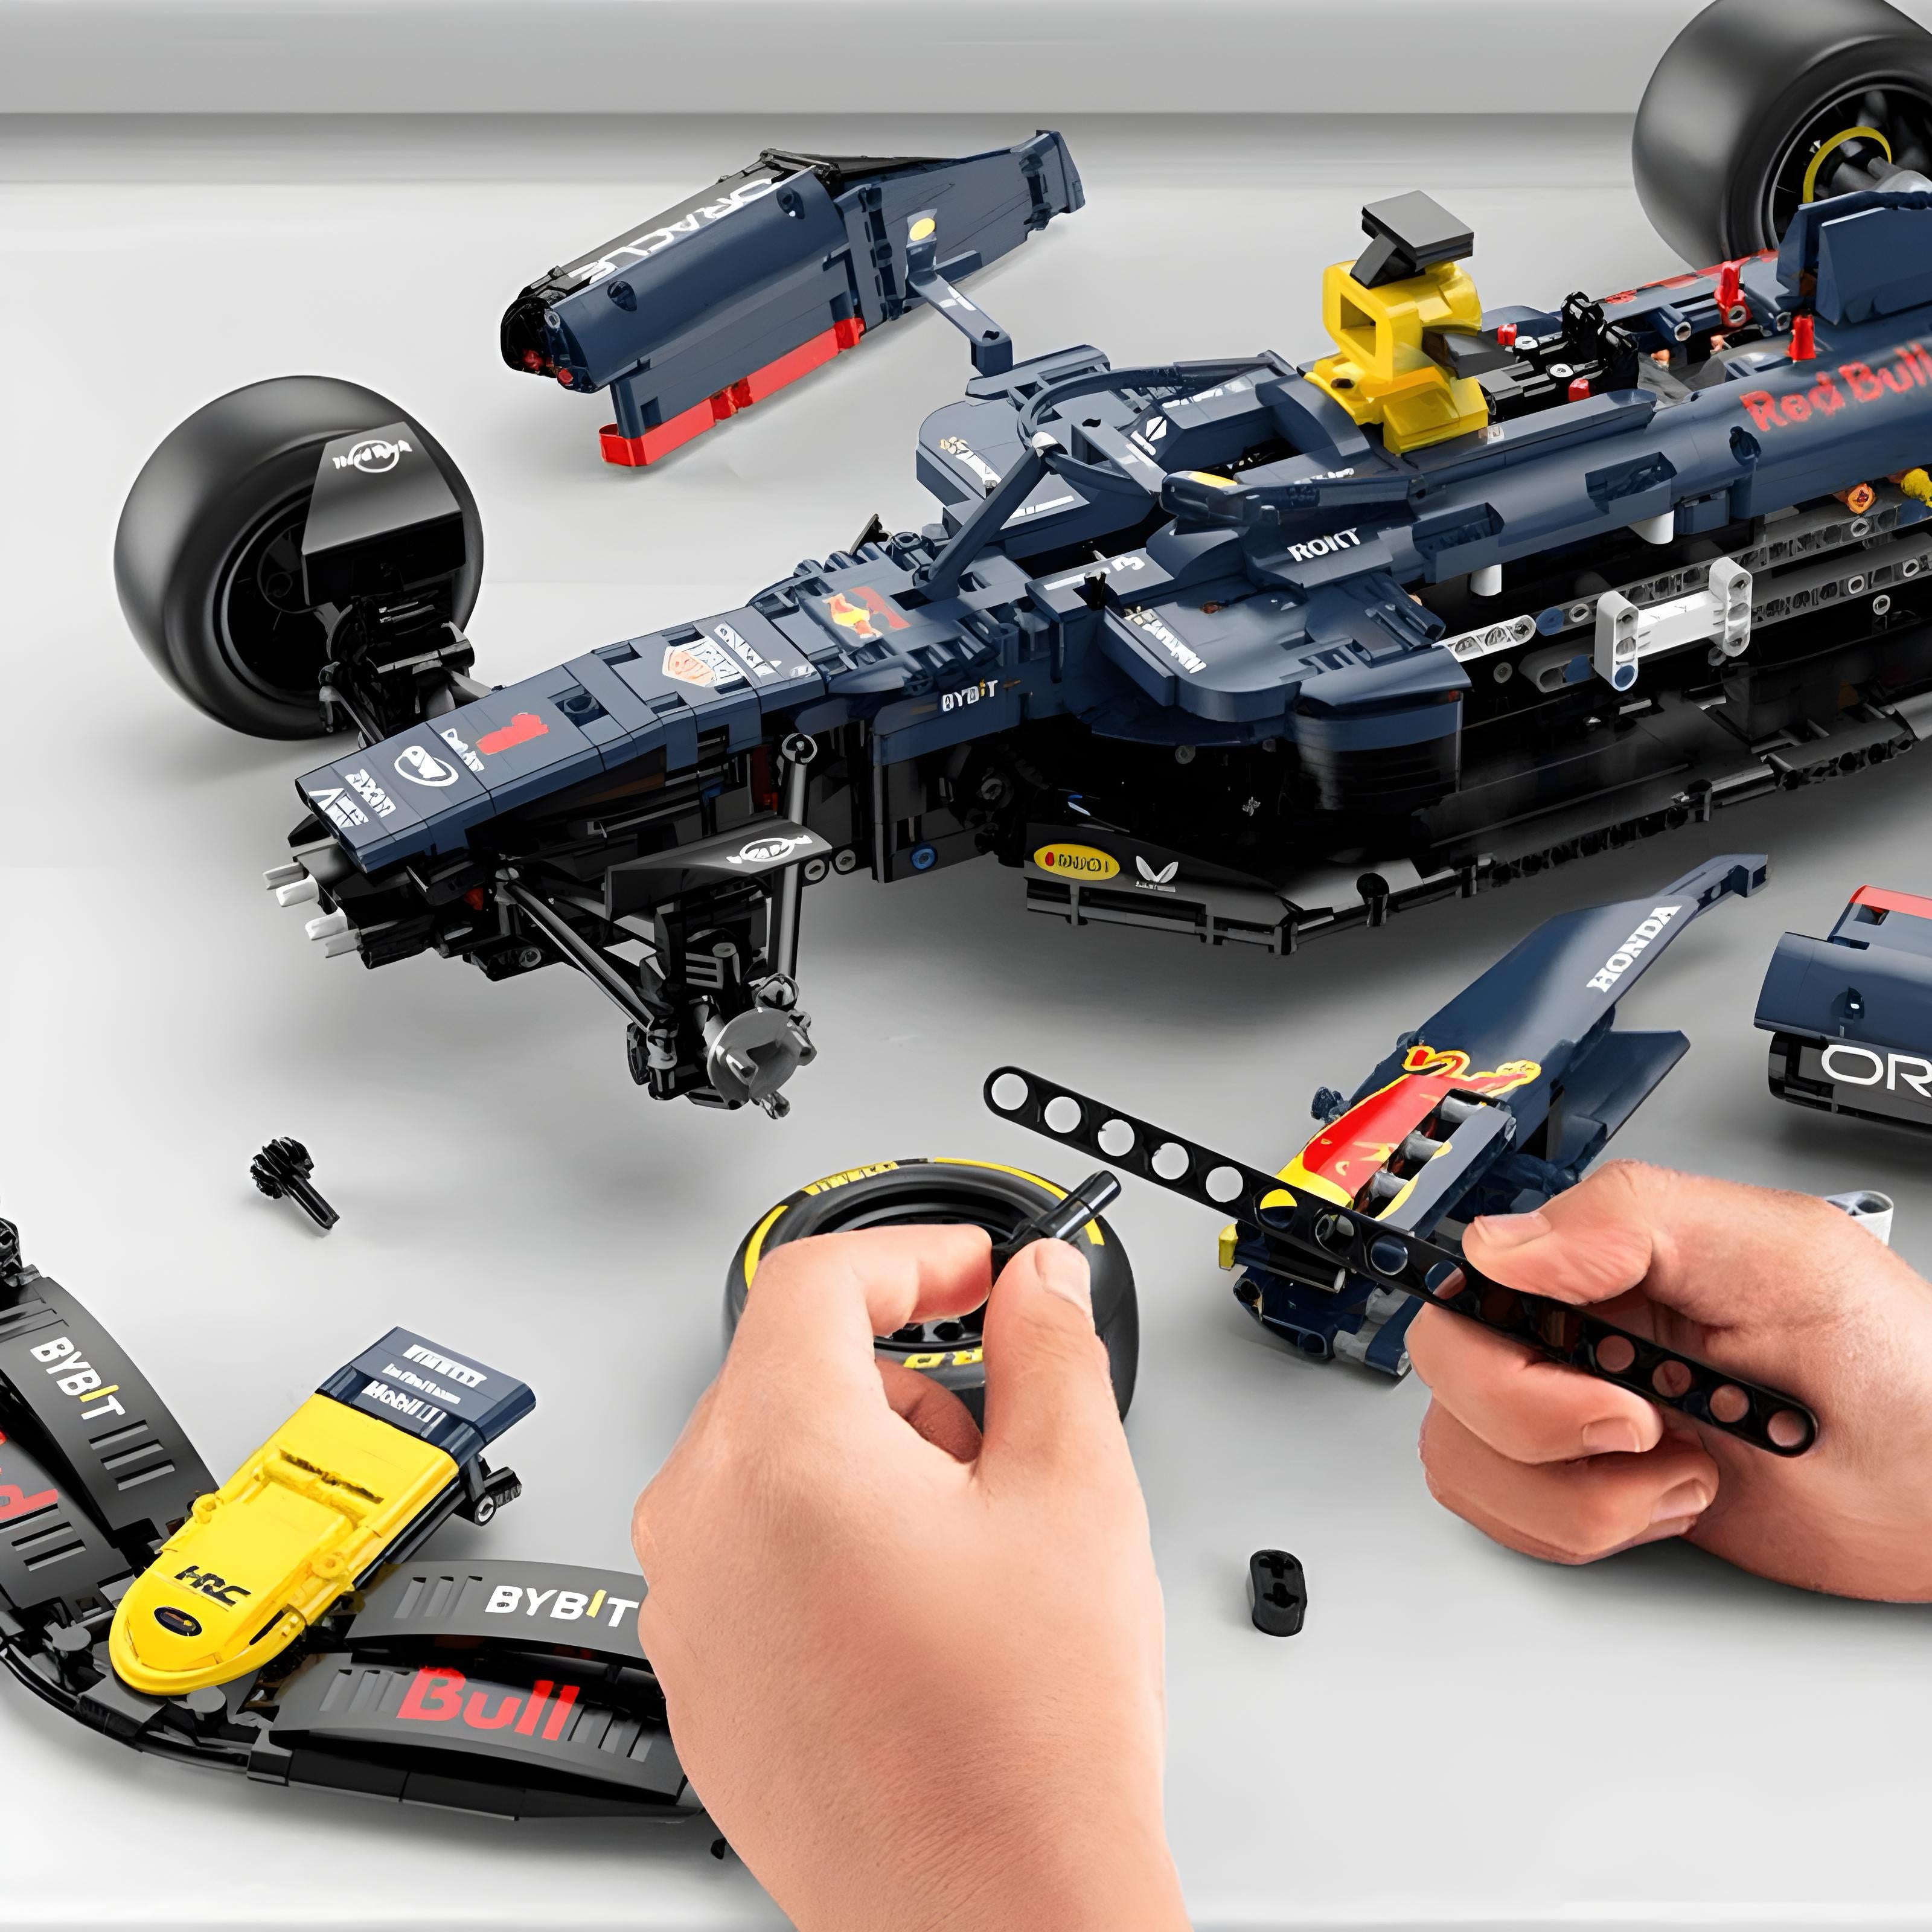 THE ULTIMATE ORACLE RED BULL RACING | 2463PCS